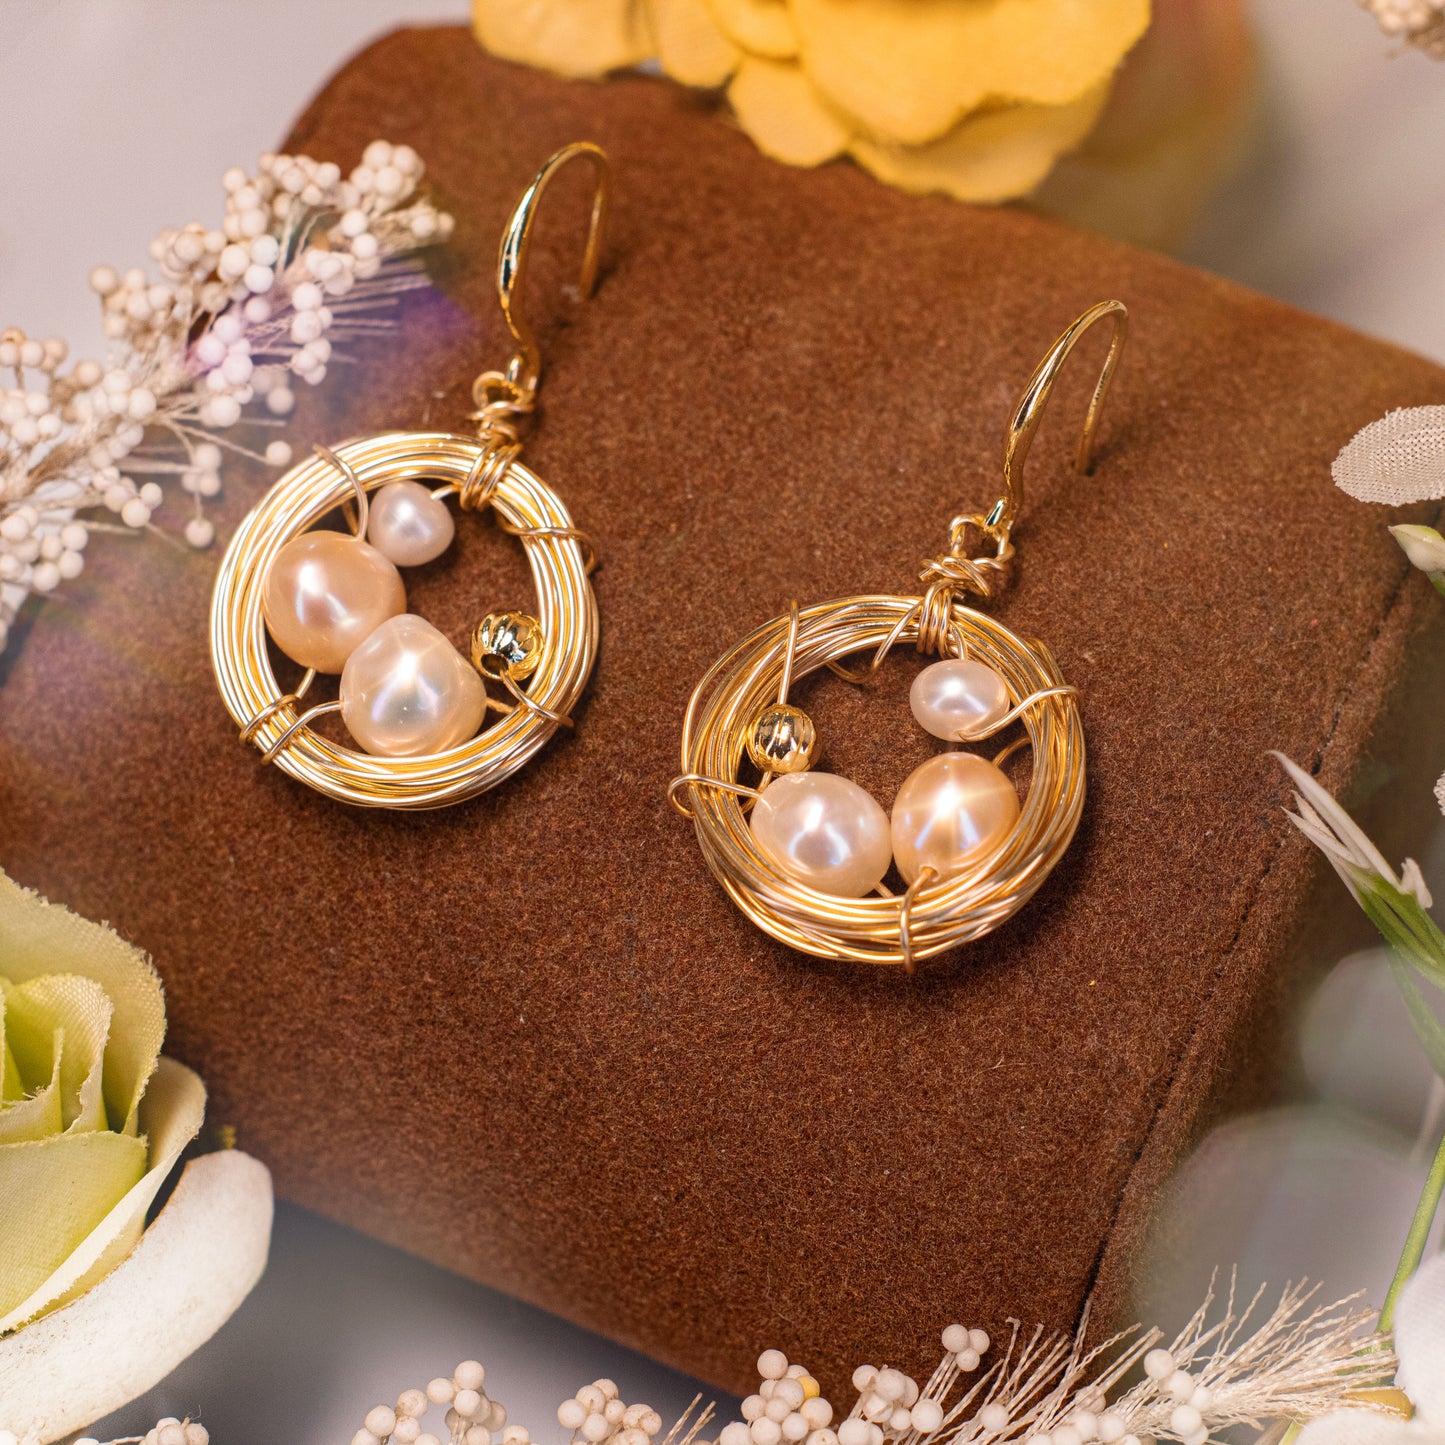 Peculiar Natural Baroque Pearls 18k Gold Plated Bird Nest Earrings - Jewelry